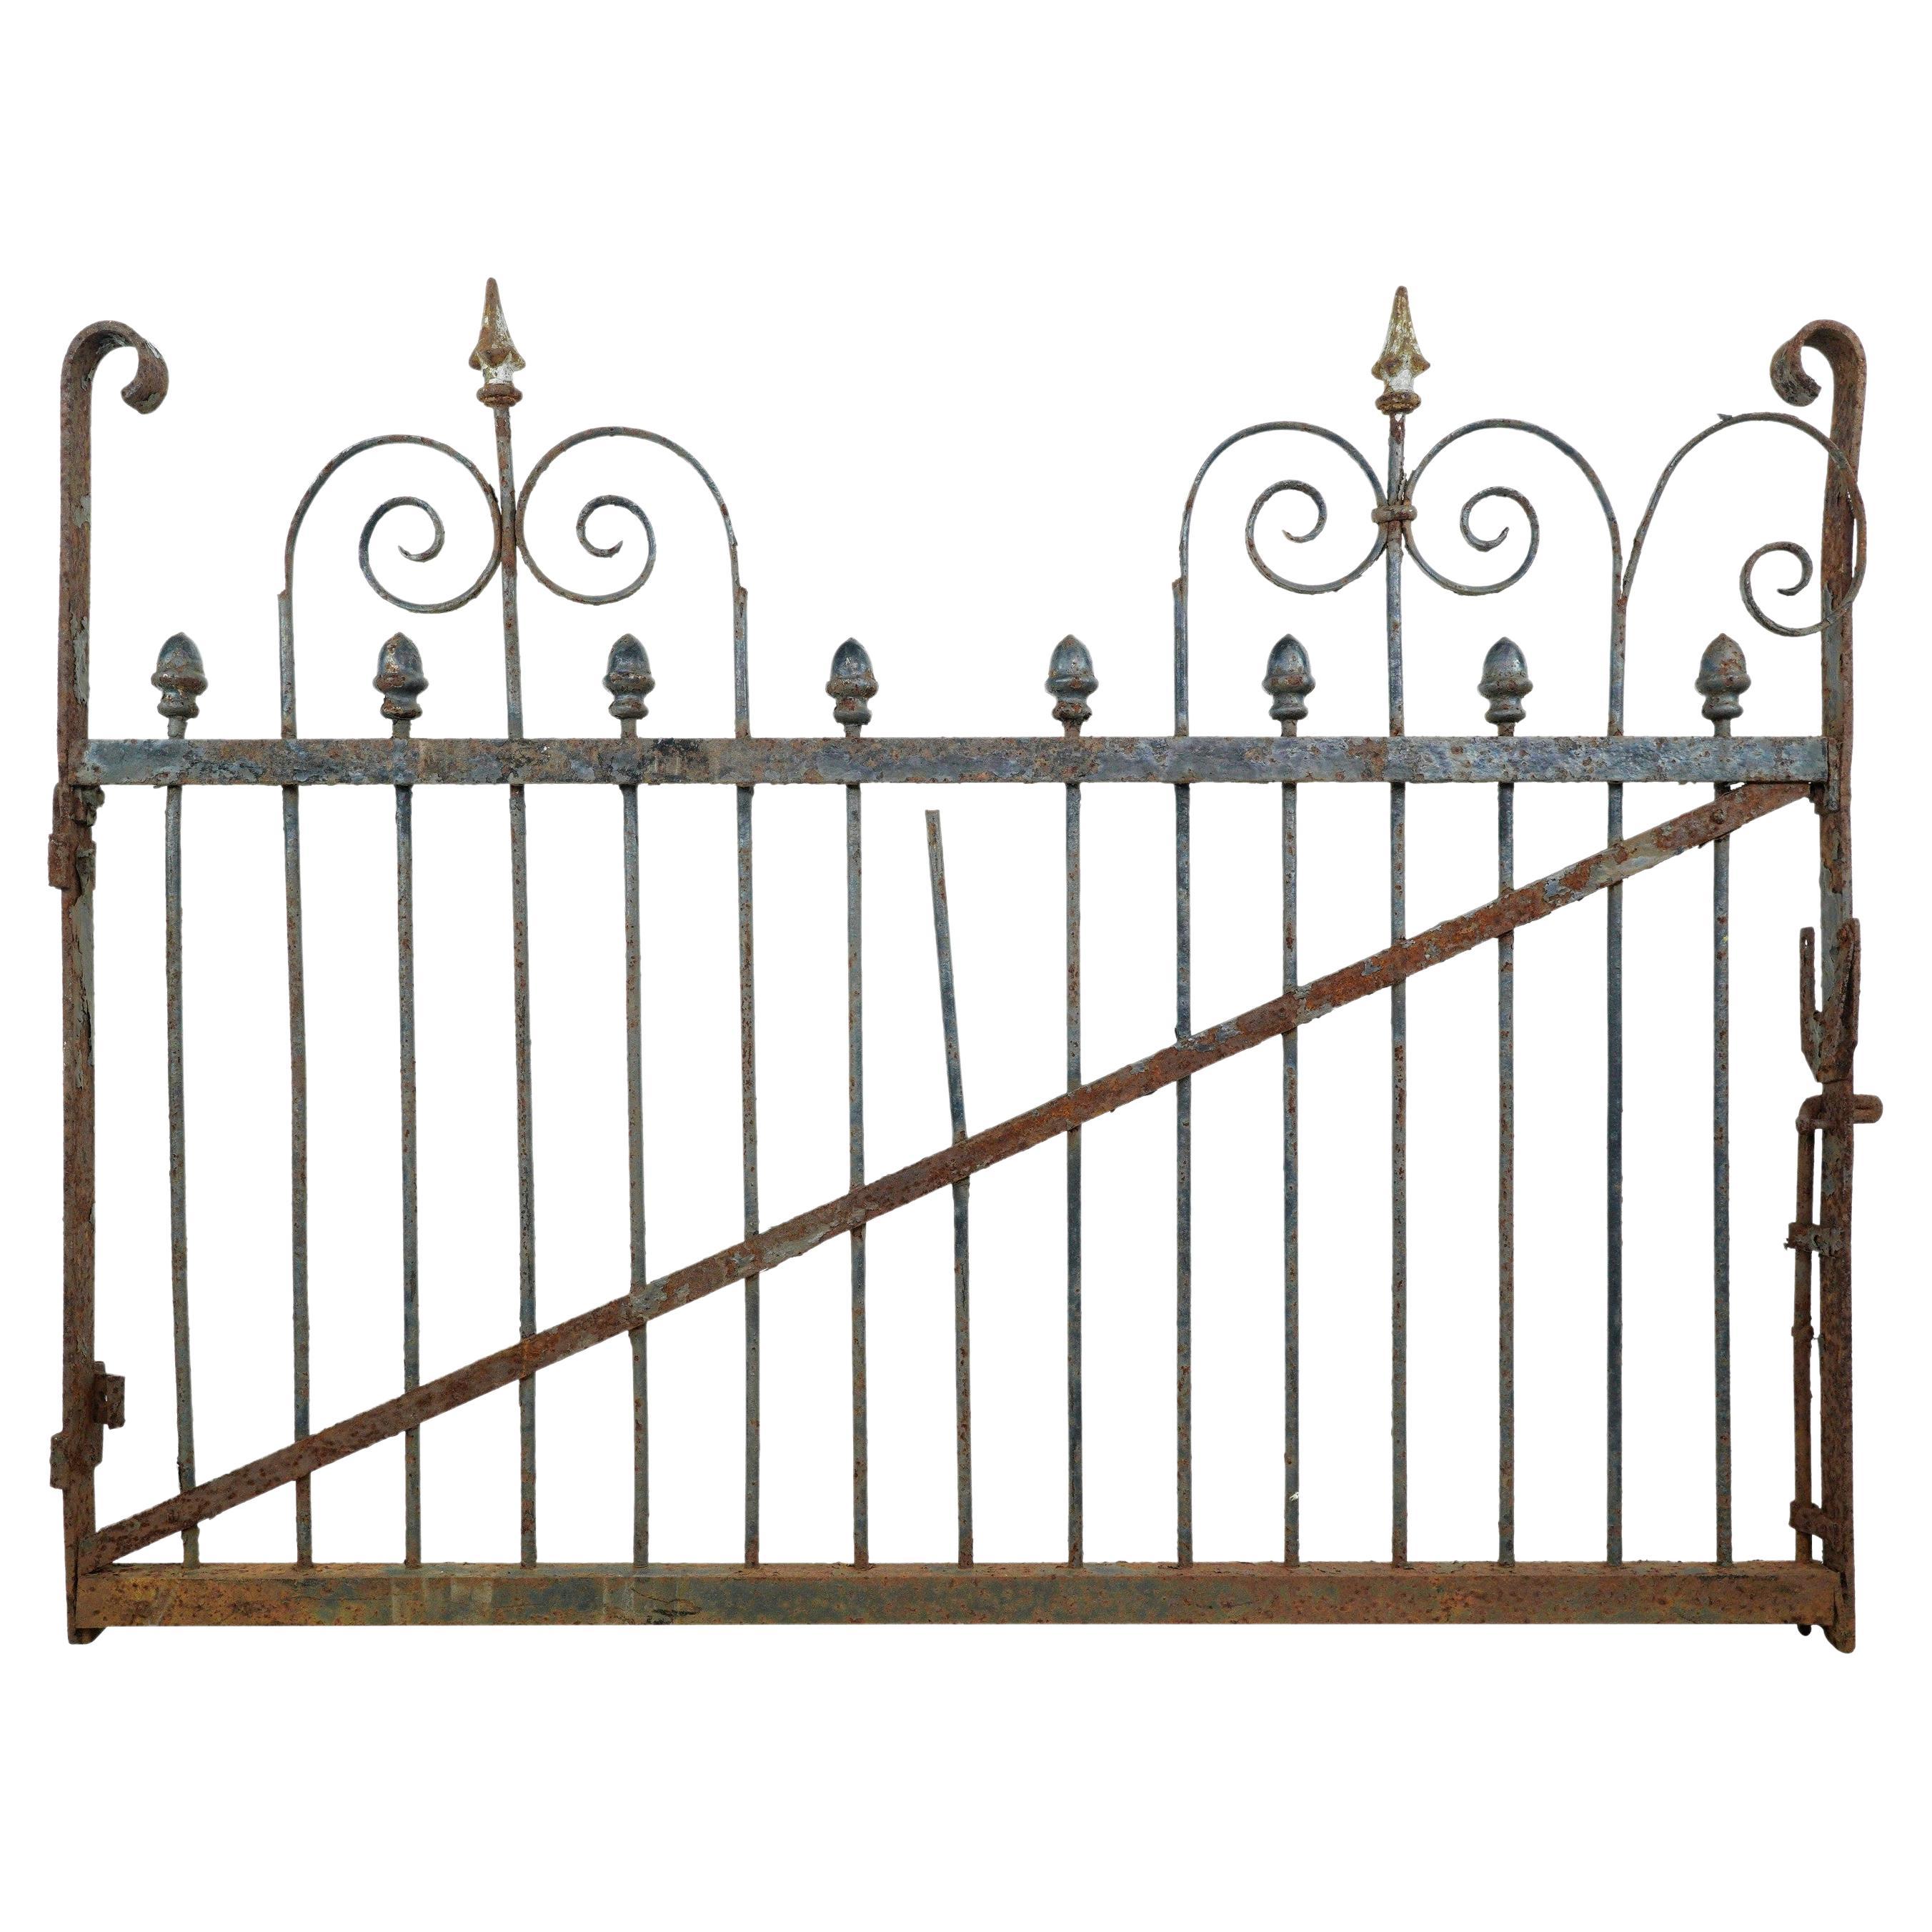 Curled Bars Wrought Iron 53 in. Privacy Yard Gate